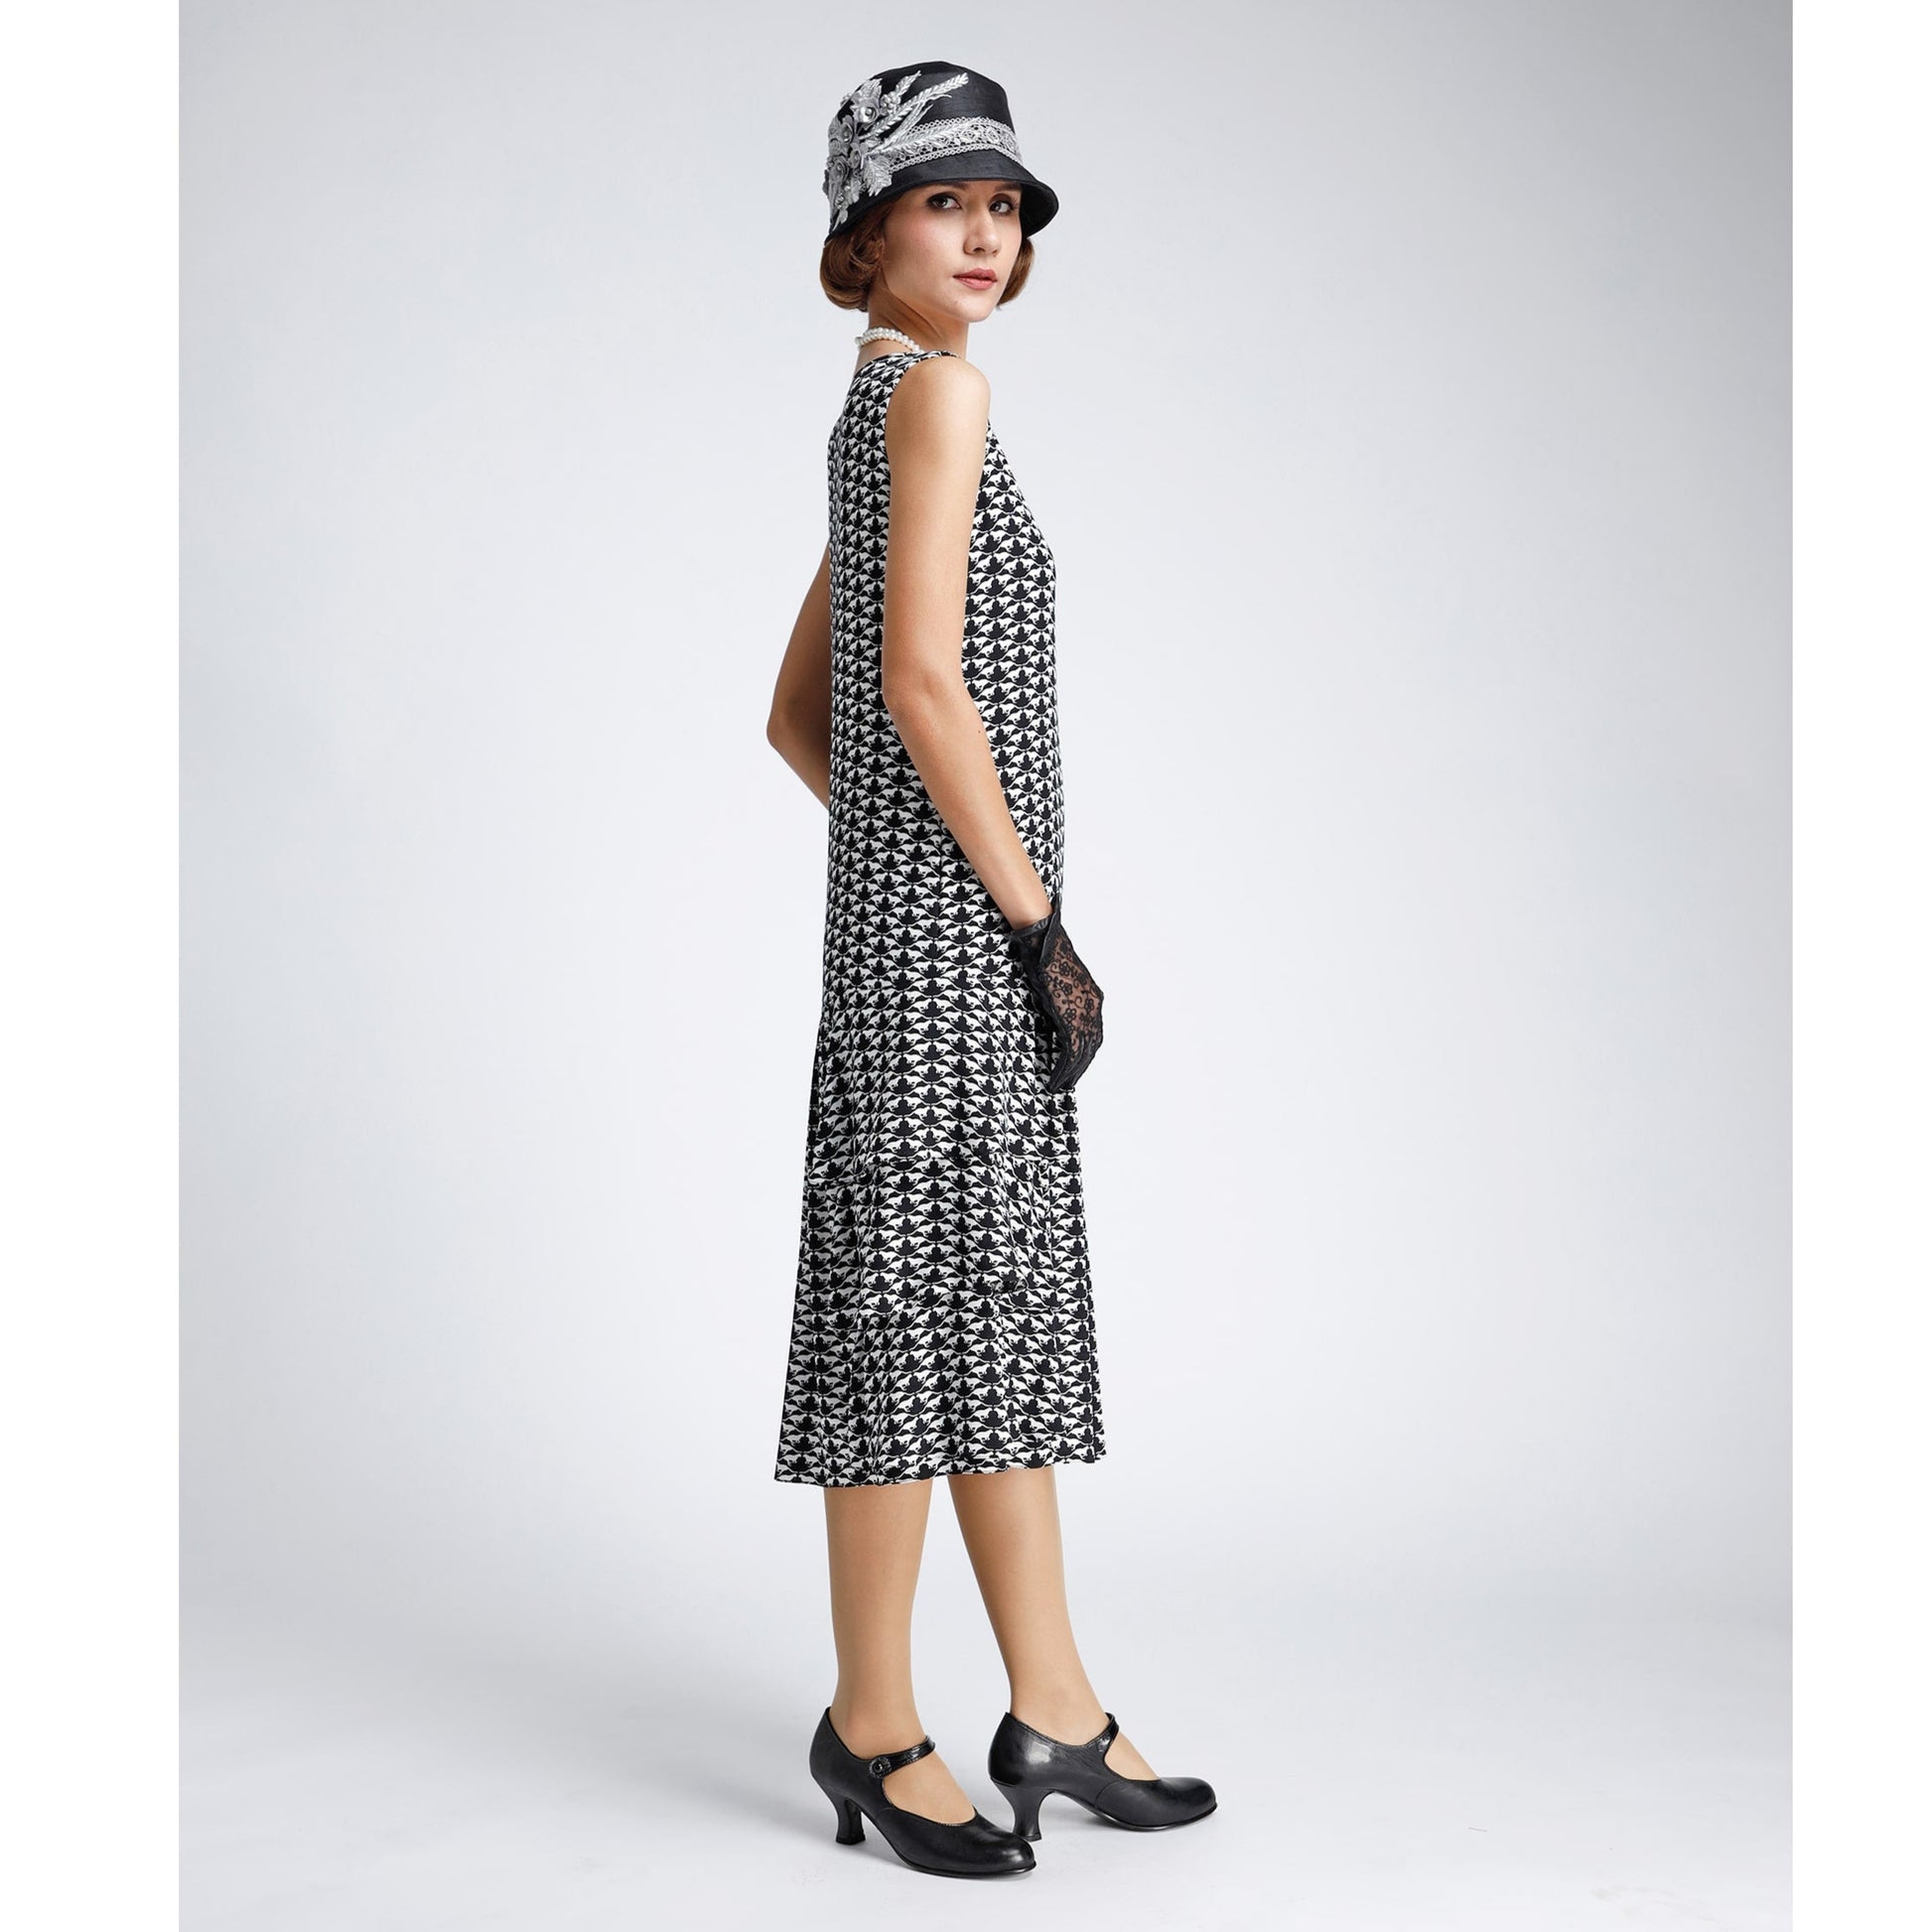 1920s fashion dress made of black and white viscose fabric. The 1920s dress can be worn as a Gatsby dress, 1920s high tea dress or roaring 20s flapper dress. 